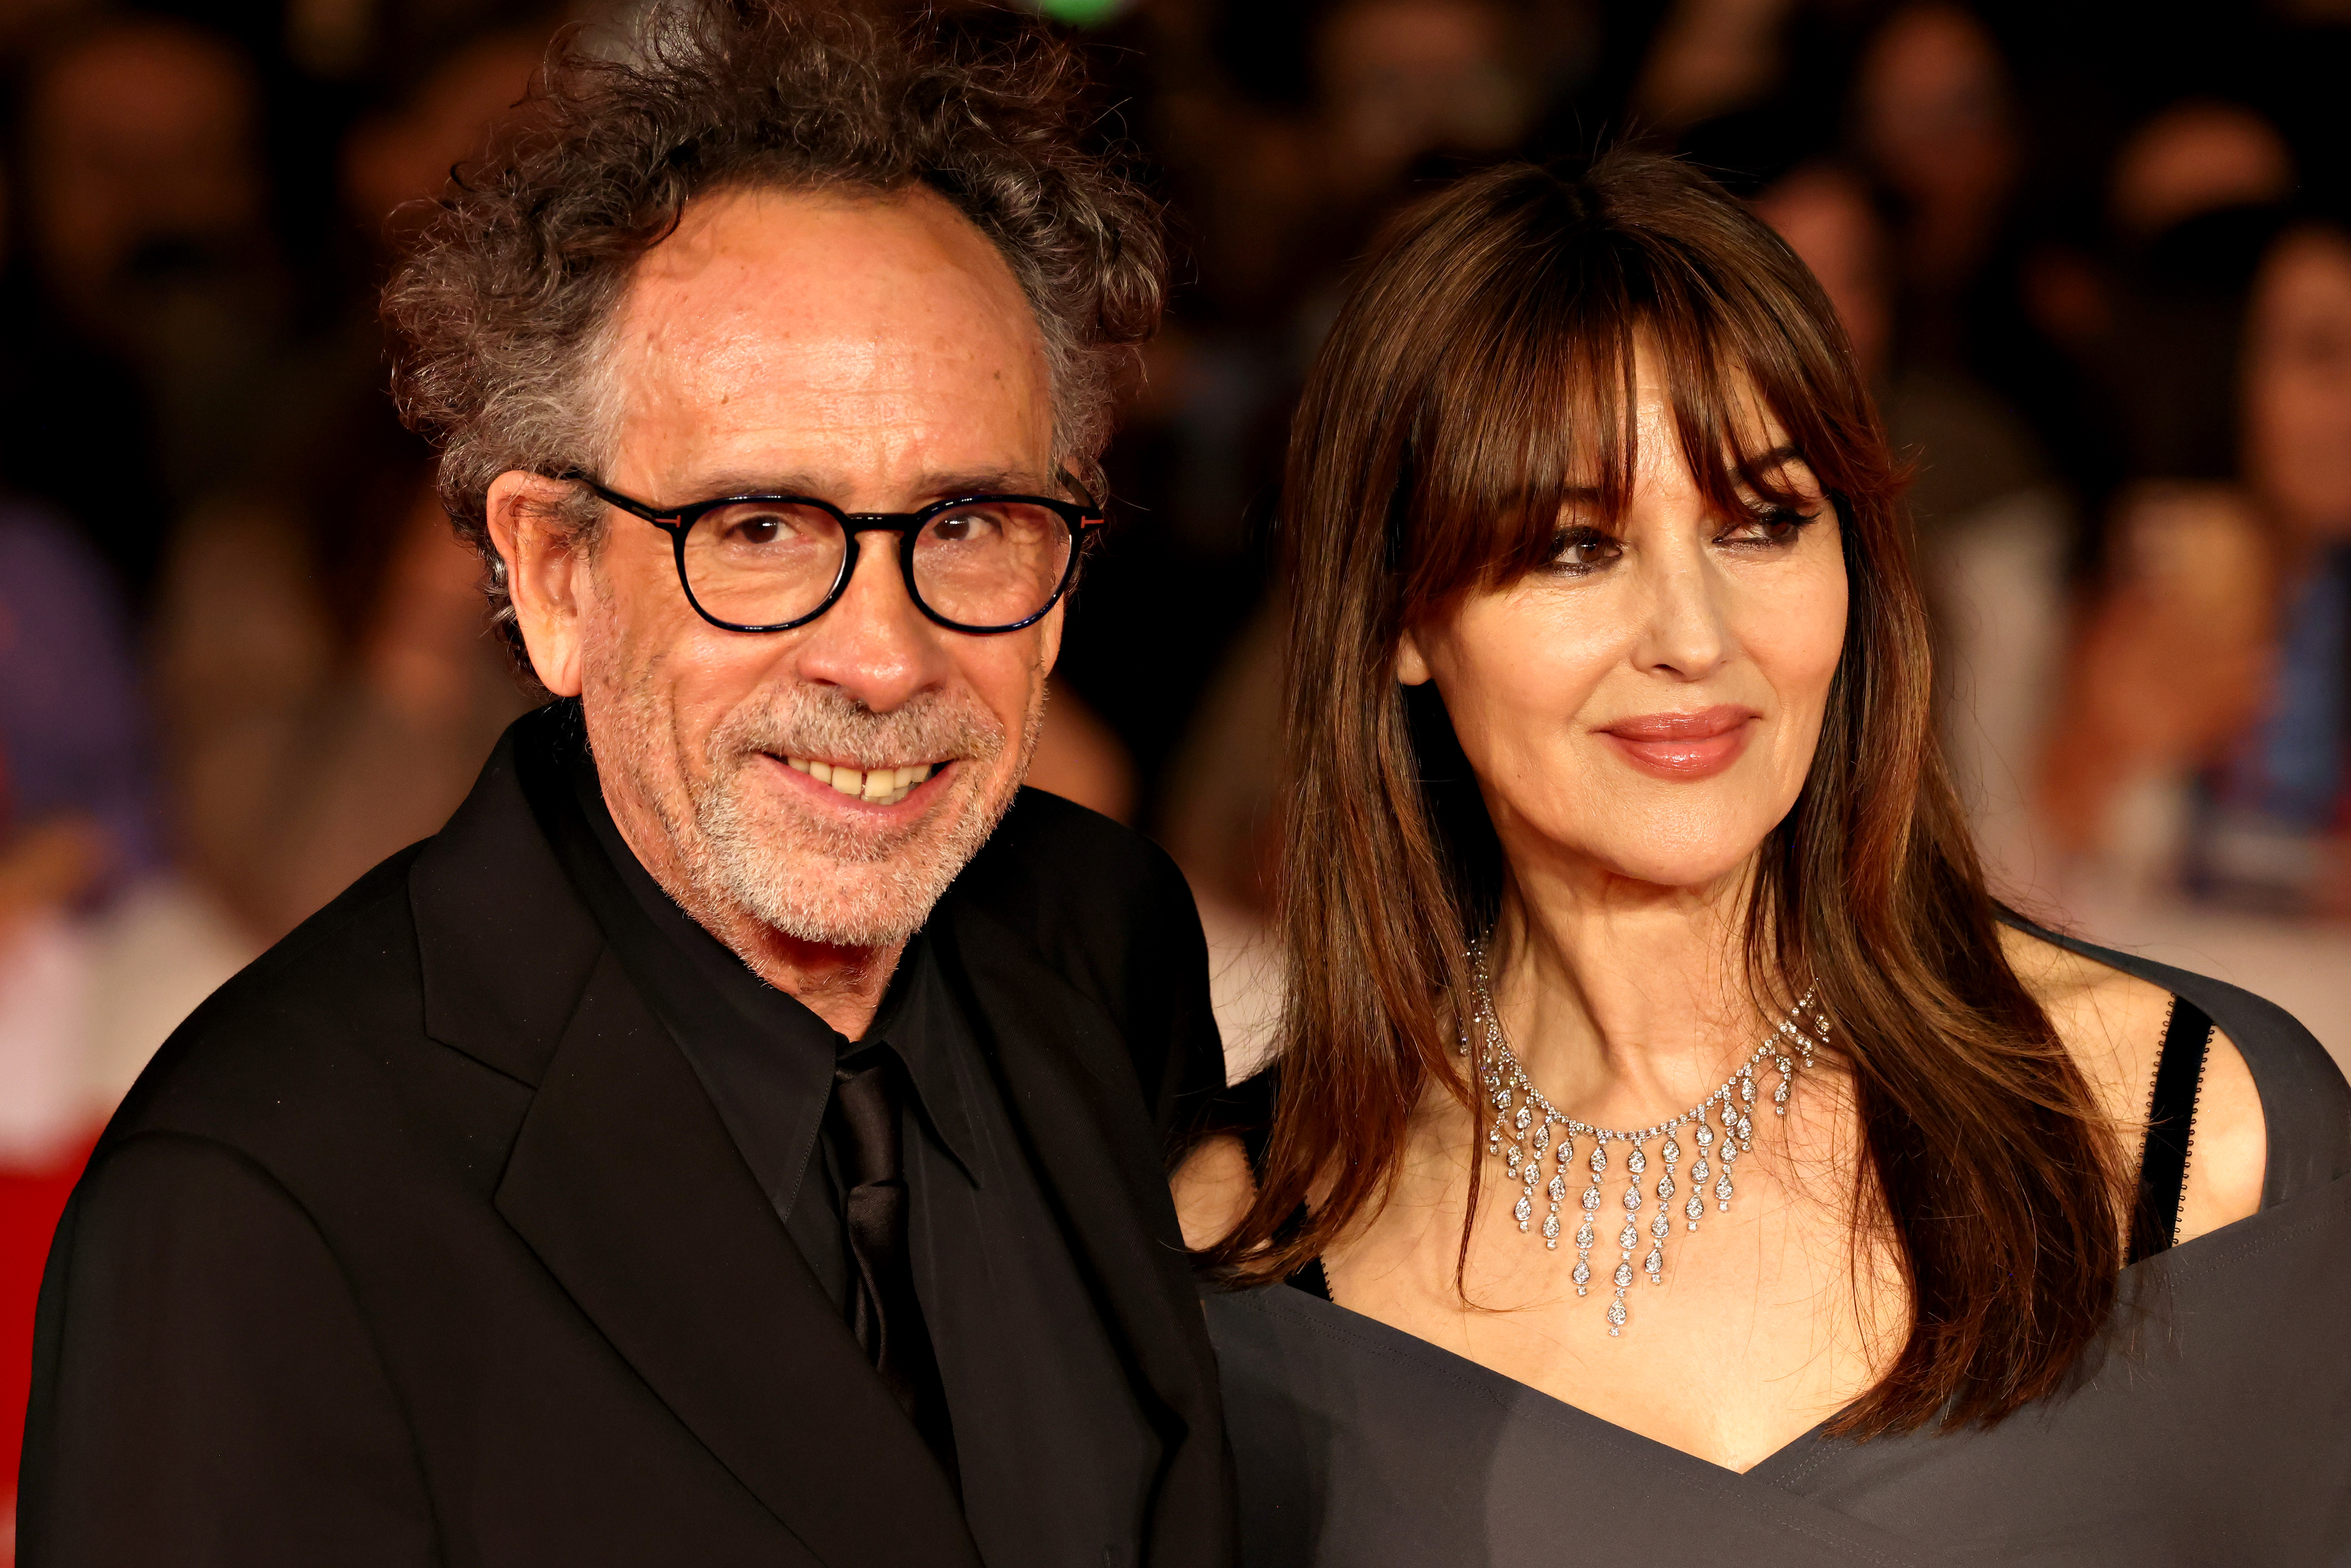 Tim Burton and Monica Bellucci at a red carpet for the movie "Diabolik Chi Sei?" in Rome, Italy on October 19, 2023 | Source: Getty Images